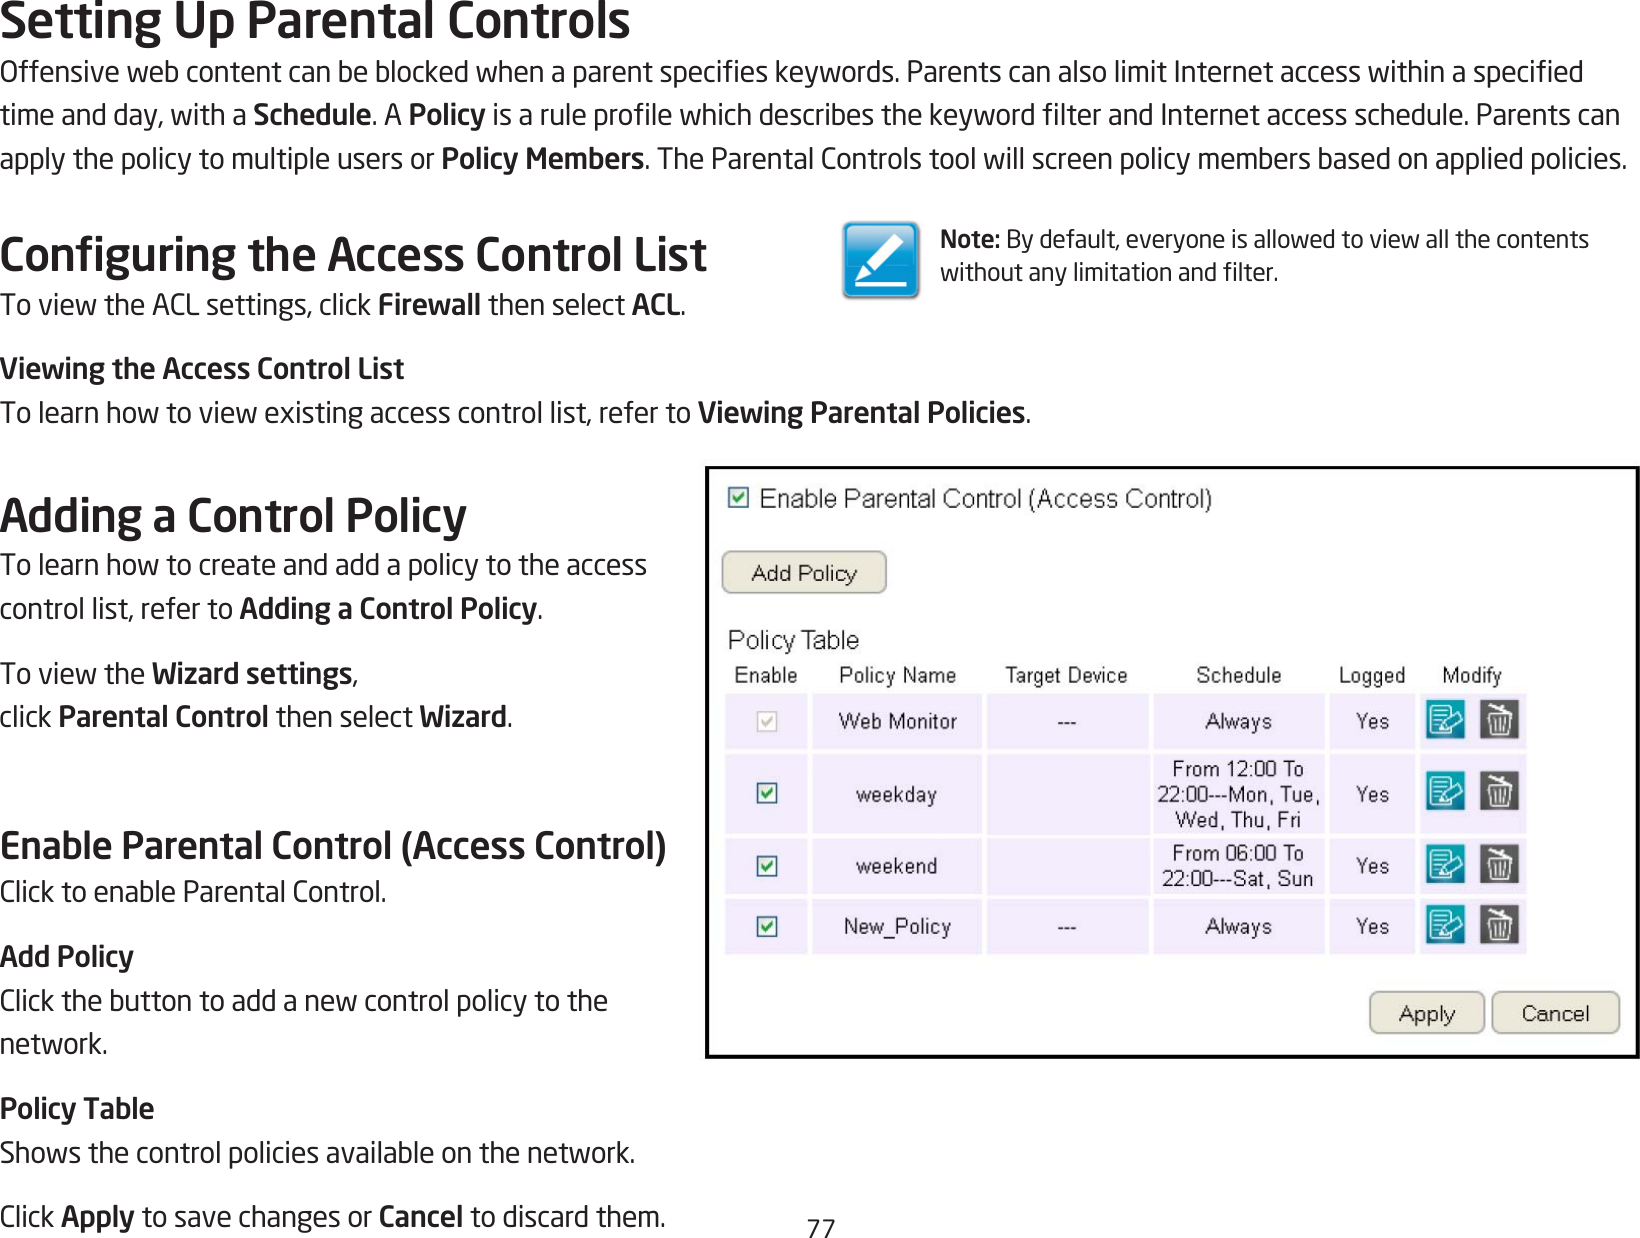 77Setting Up Parental ControlsOffensivewebcontentcanbeblockedwhenaparentspecieskeywords.ParentscanalsolimitInternetaccesswithinaspeciedtimeandday,withaSchedule. A PolicyisaruleprolewhichdescribesthekeywordlterandInternetaccessschedule.Parentscanapply the policy to multiple users or Policy Members.TheParentalControlstoolwillscreenpolicymembersbasedonappliedpolicies.Conguring the Access Control ListToviewtheACLsettings,clickFirewall then select ACL.Viewing the Access Control ListTolearnhowtoviewexistingaccesscontrollist,refertoViewing Parental Policies.Adding a Control PolicyTolearnhowtocreateandaddapolicytotheaccesscontrol list, refer to Adding a Control Policy.ToviewtheWizard settings, click Parental Control then select Wizard.Enable Parental Control (Access Control)ClicktoenableParentalControl.Add PolicyClickthebuttontoaddanewcontrolpolicytothenetwork.Policy TableShowsthecontrolpoliciesavailableonthenetwork.ClickApply to save changes or Cancel to discard them.Note:Bydefault,everyoneisallowedtoviewallthecontentswithoutanylimitationandlter.